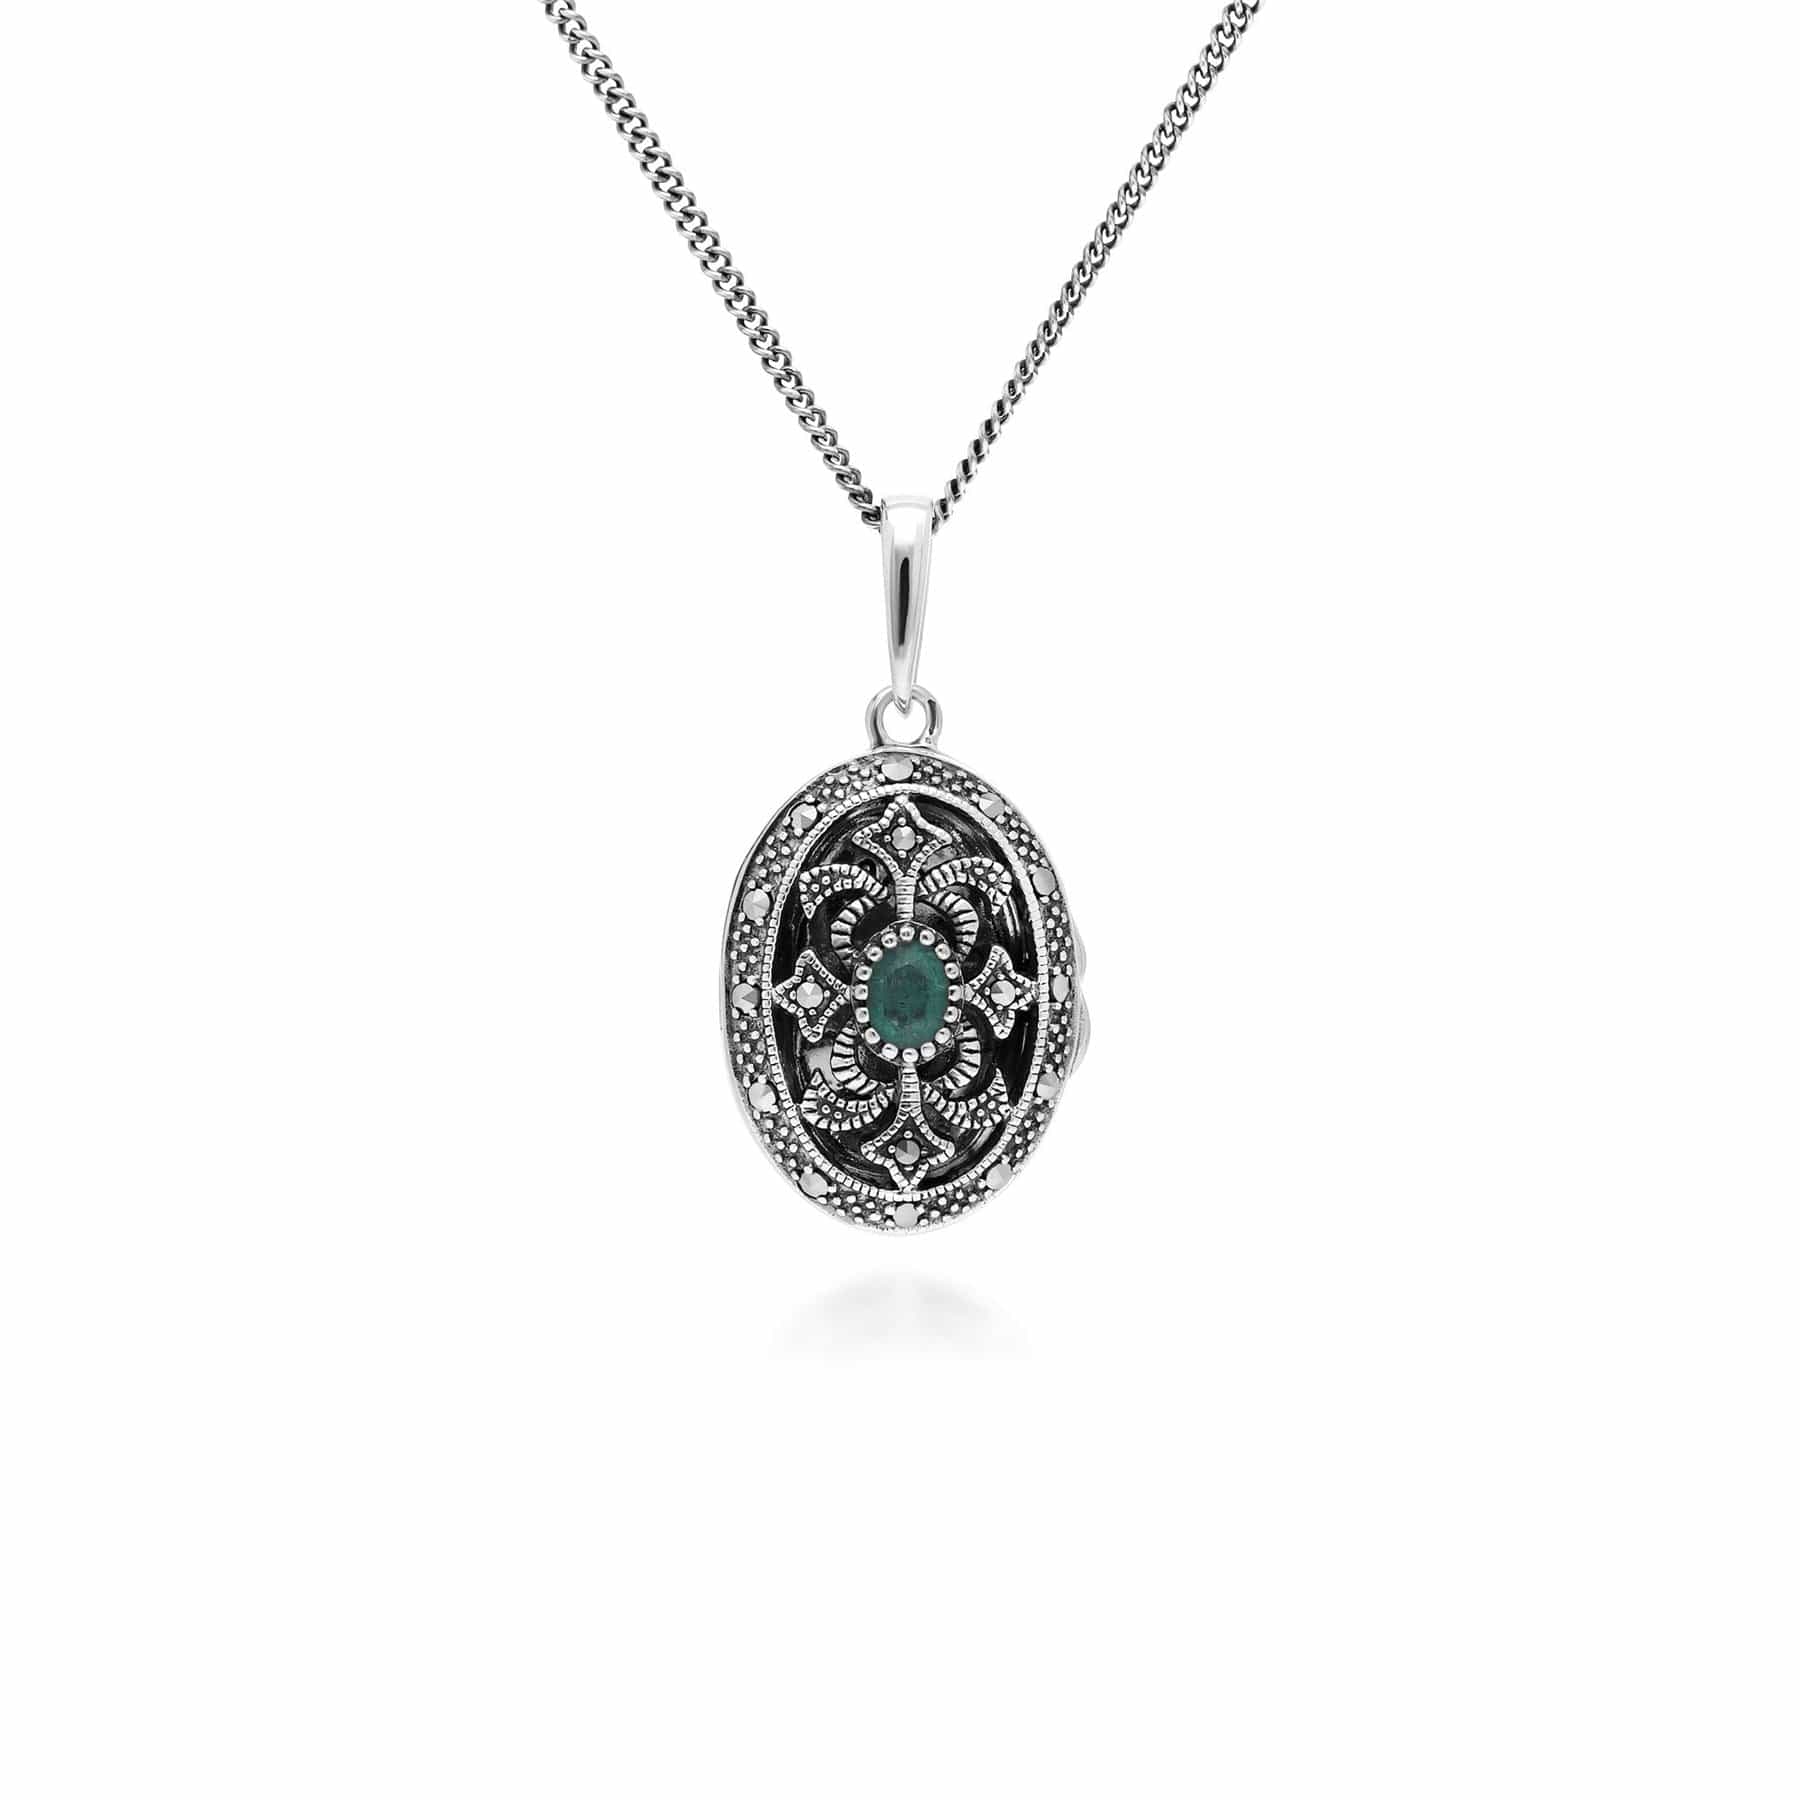 214N716201925 Art Nouveau Style Oval Emerald & Marcasite Locket Necklace in 925 Sterling Silver 1